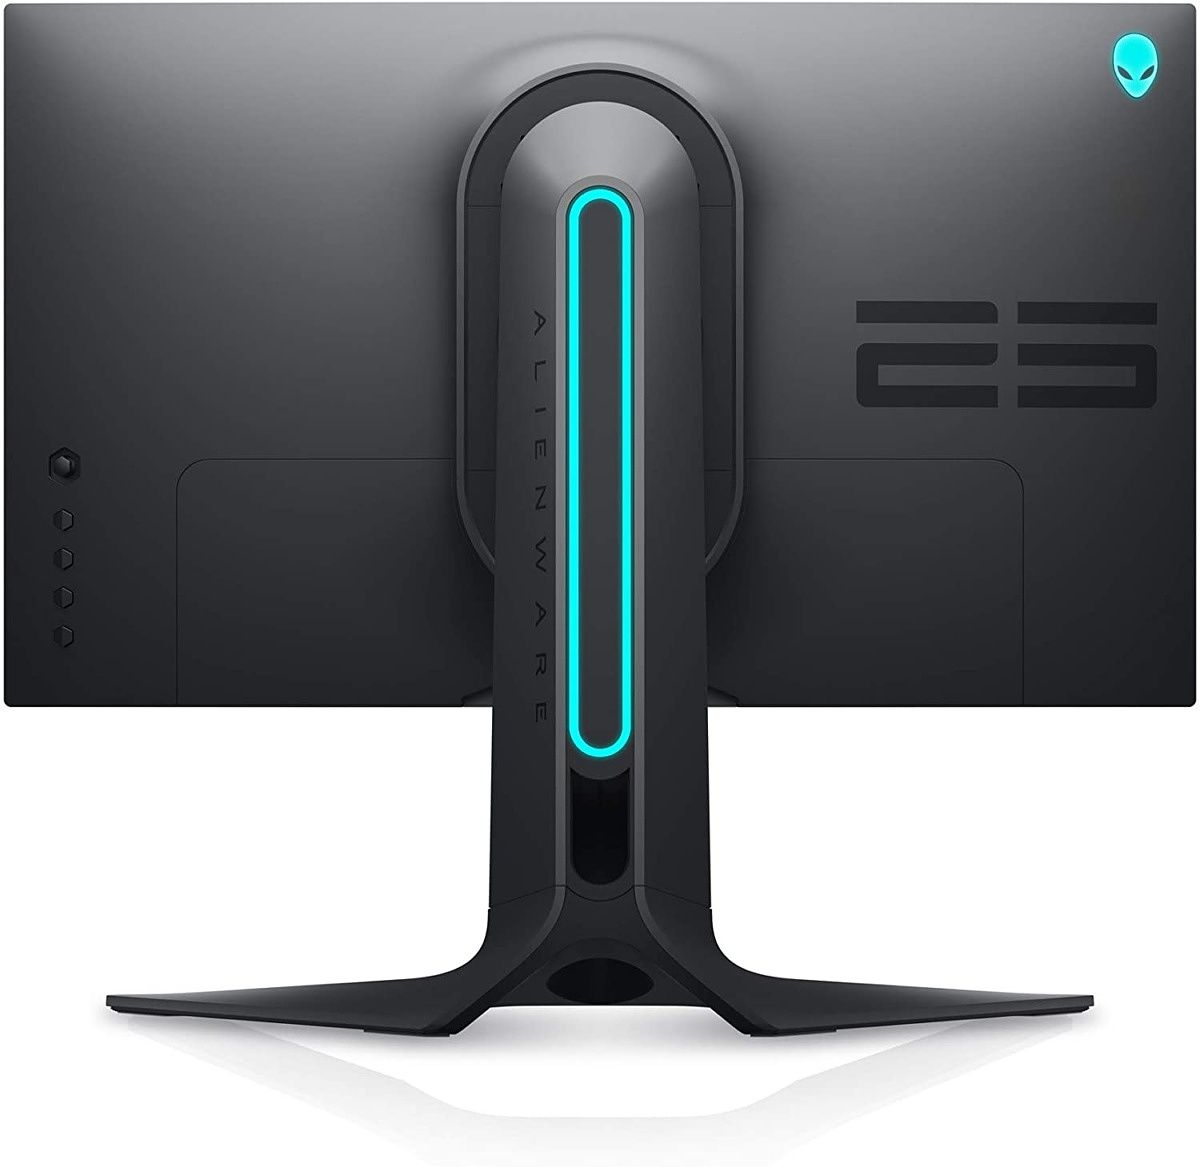 This Alienware monitor comes in a more compact size of 24.5 inches, offering a refresh rate of 240Hz.  It's the perfect monitor for popular esports titles, and it's at an all-time low right now on Amazon.